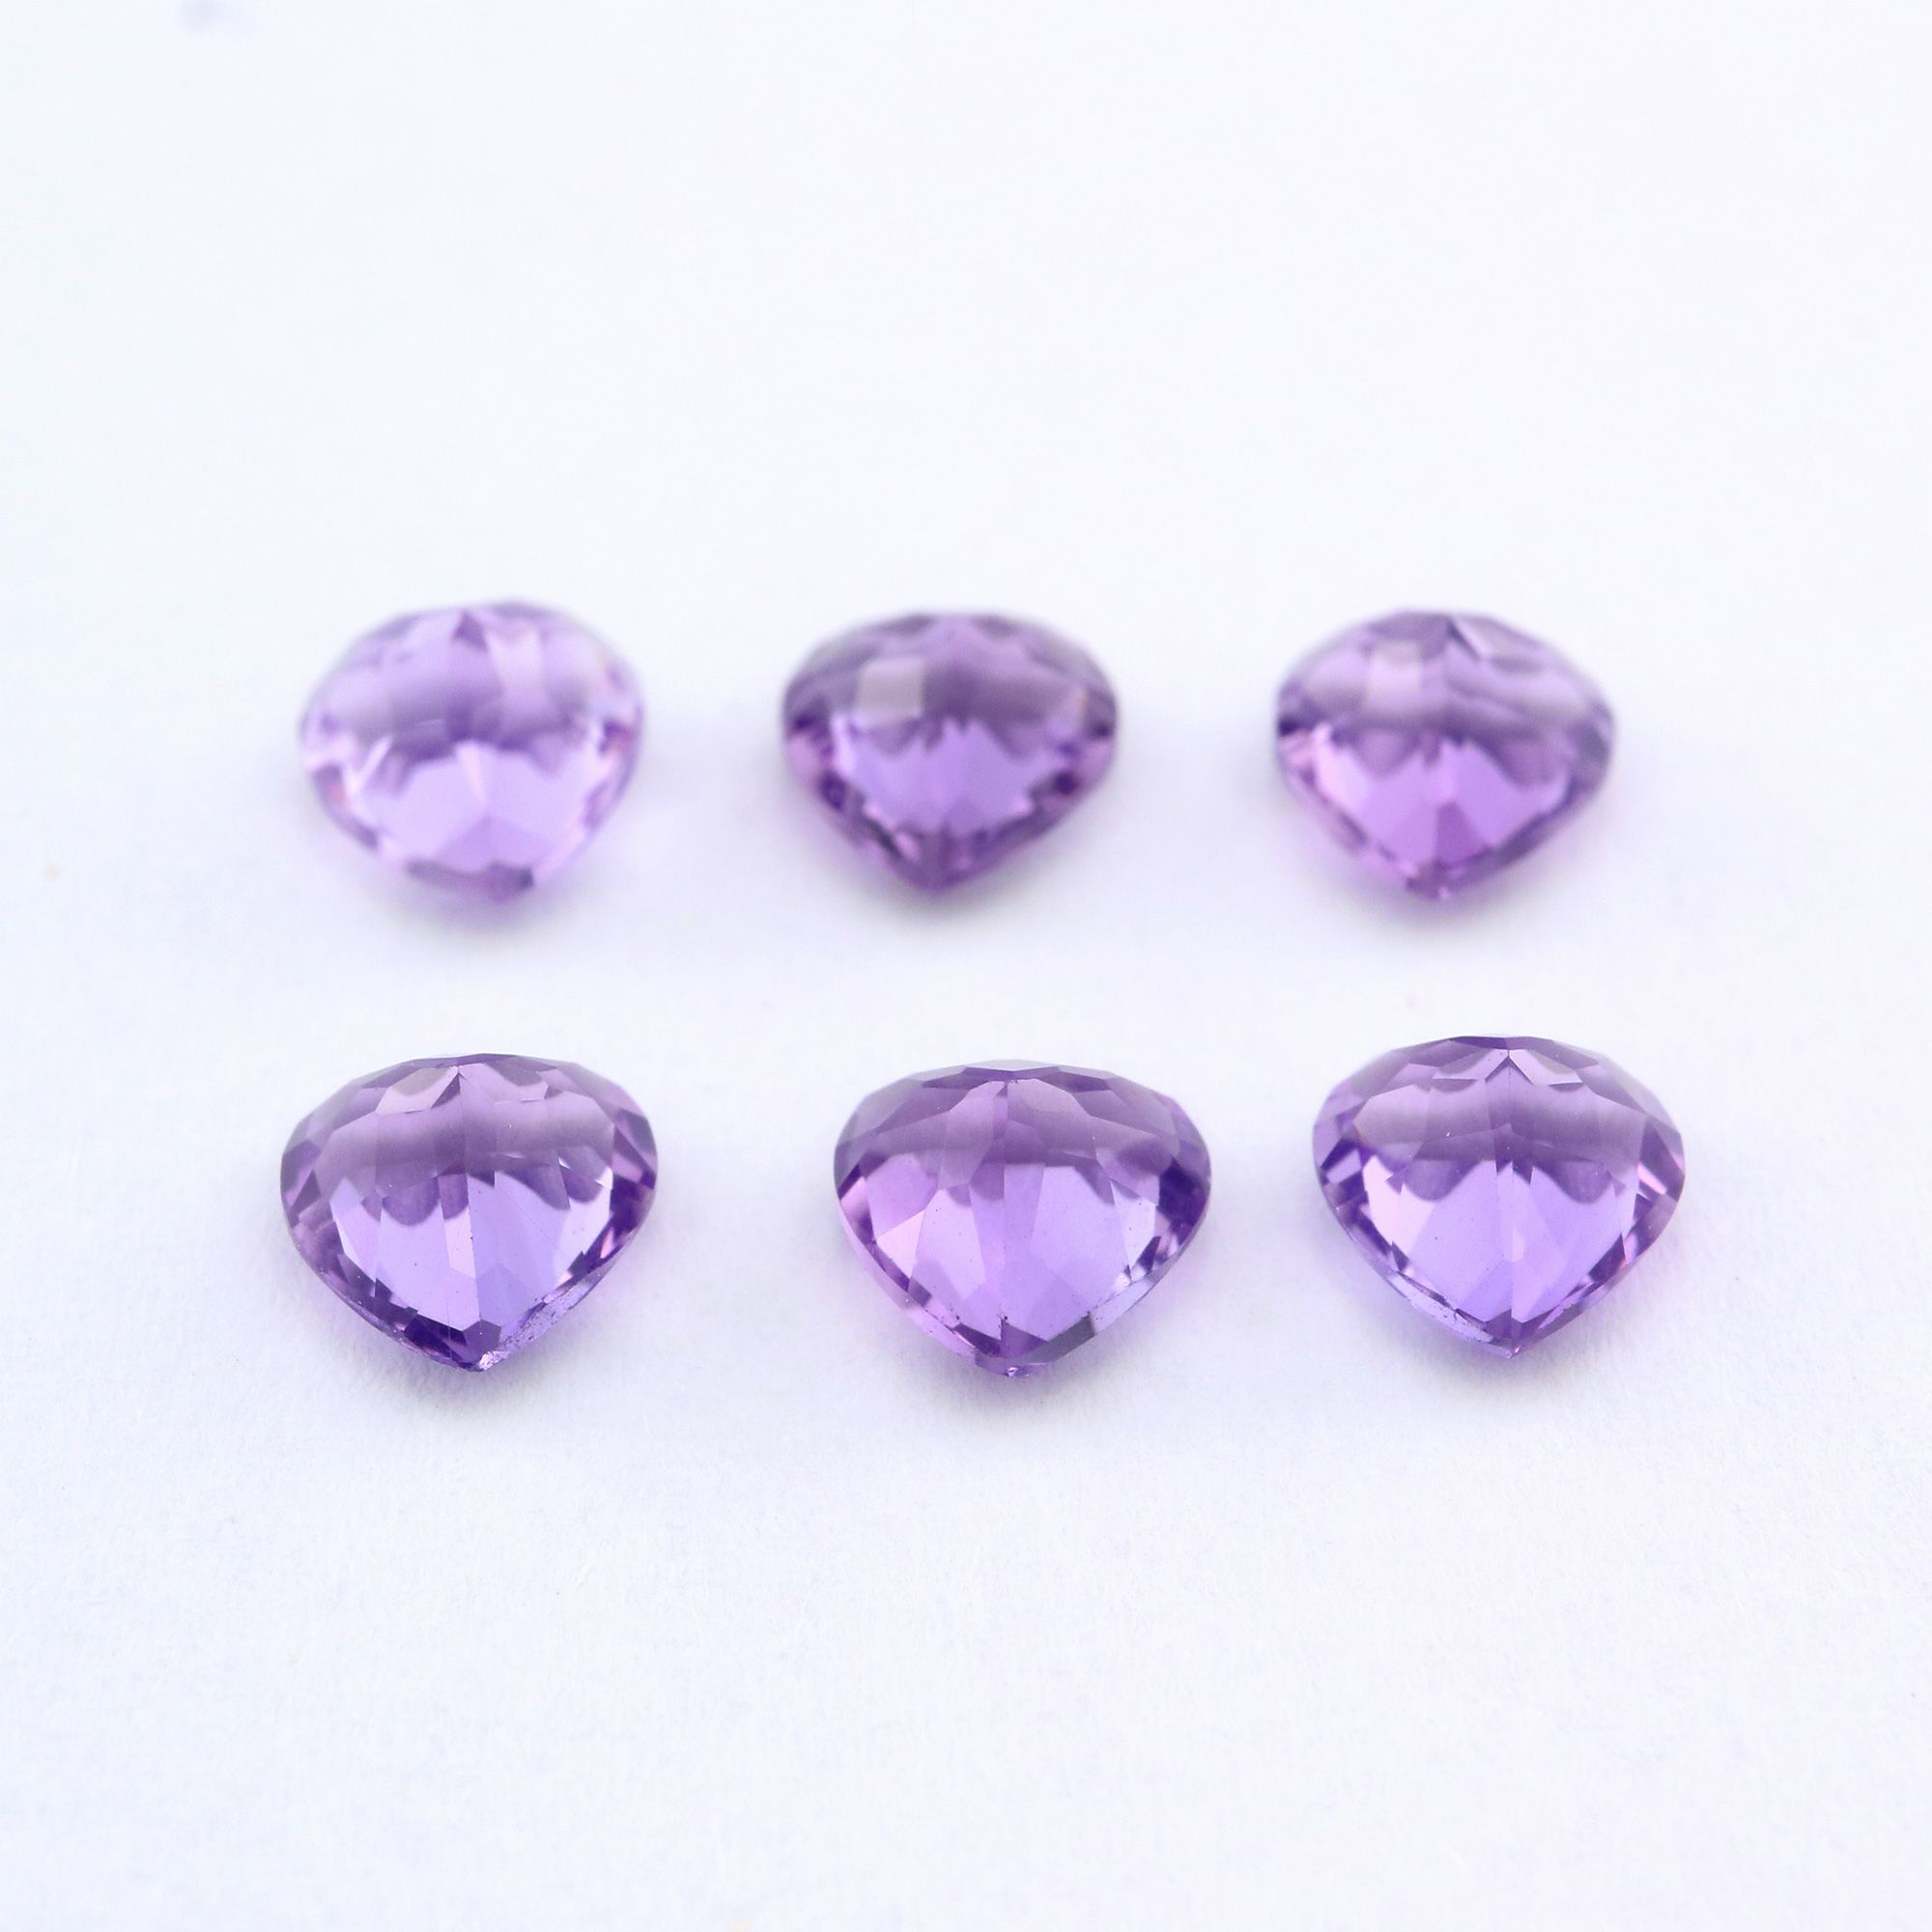 5Pcs Heart Purple Amethyst February Birthstone Faceted Cut Loose Gemstone Nature Semi Precious Stone DIY Jewelry Supplies 4130015 - Click Image to Close